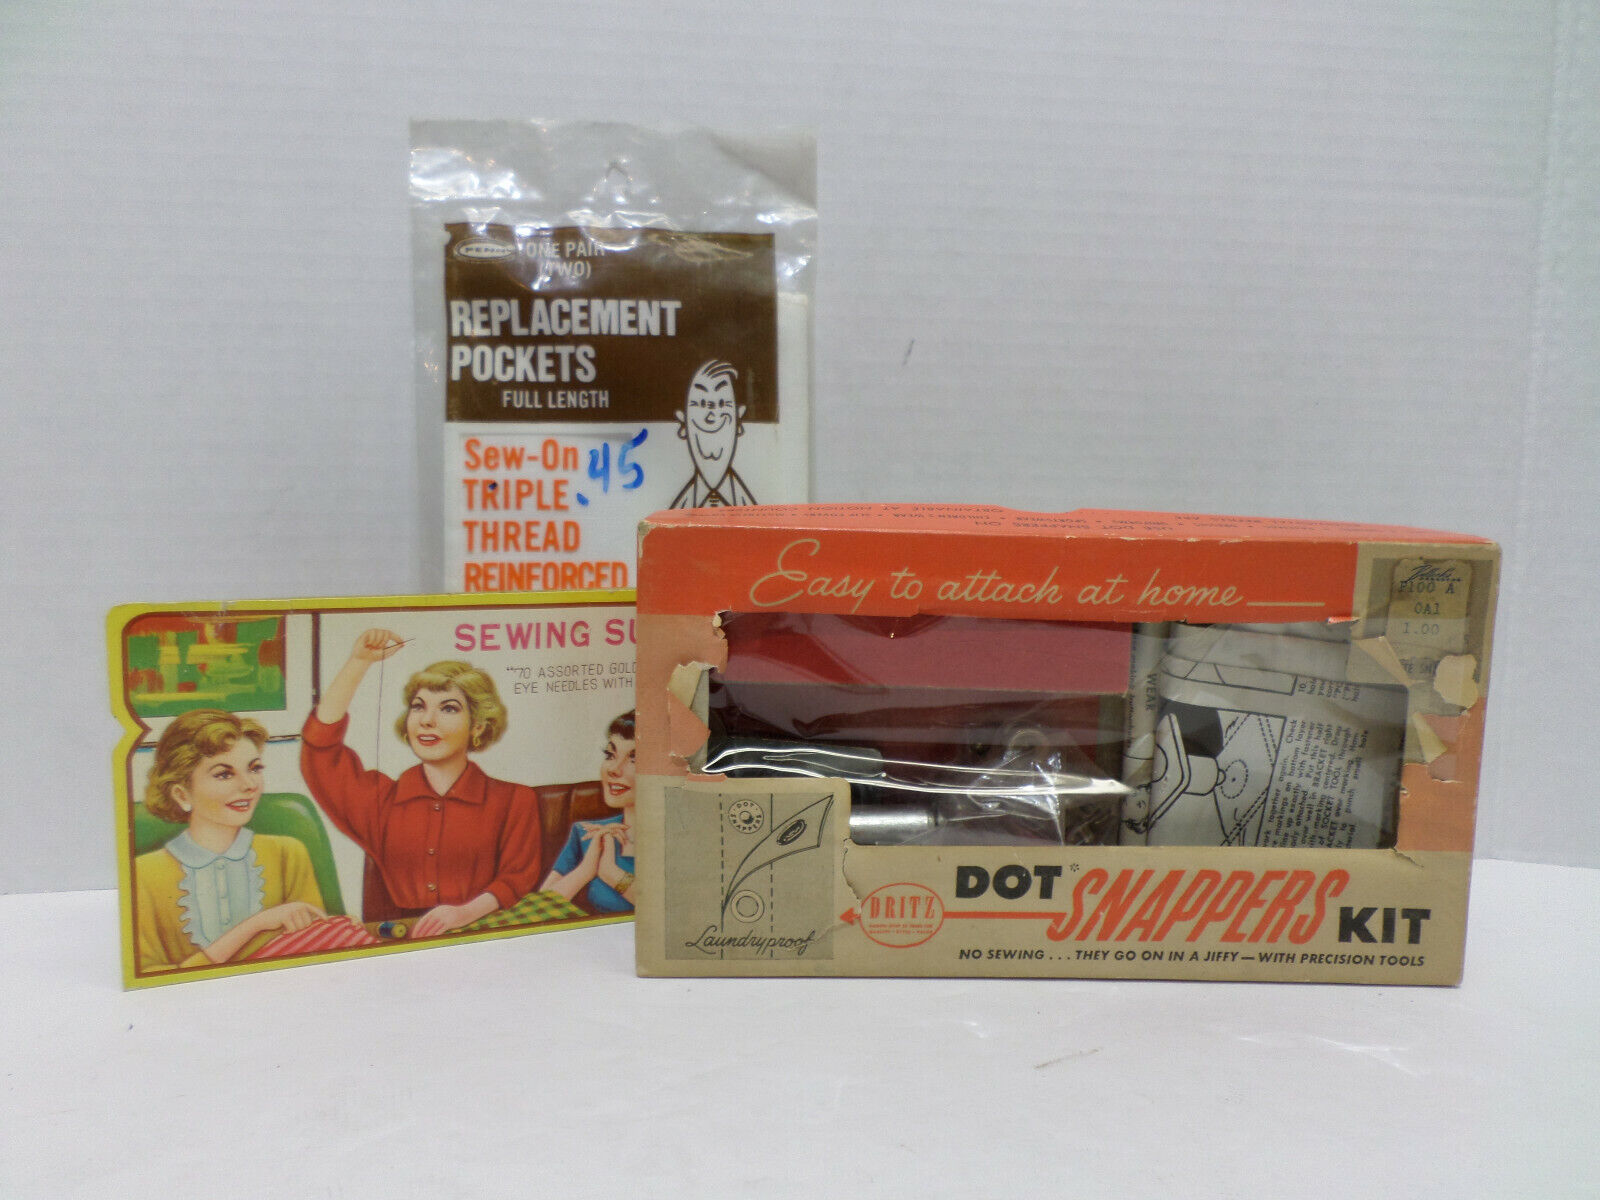 Vintage Sewing Lot:  Sewing Susan, Replacement Pockets, Dot Snappers Kit